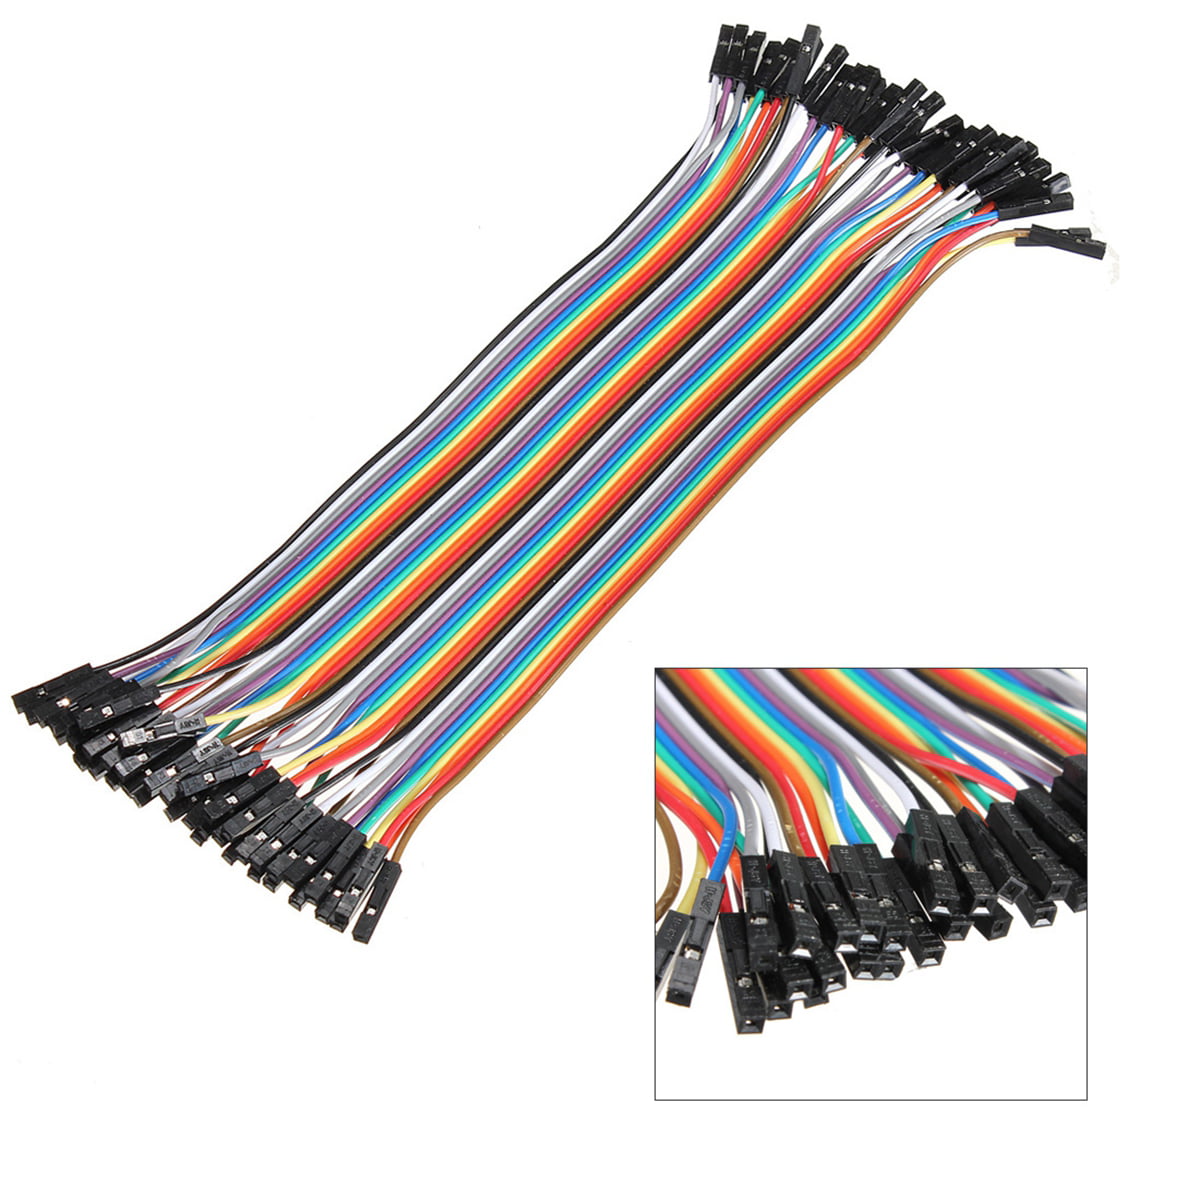 40pcs 30cm 2.54mm Arduino Dupont jumper Wires Ables Shield Female to Female 